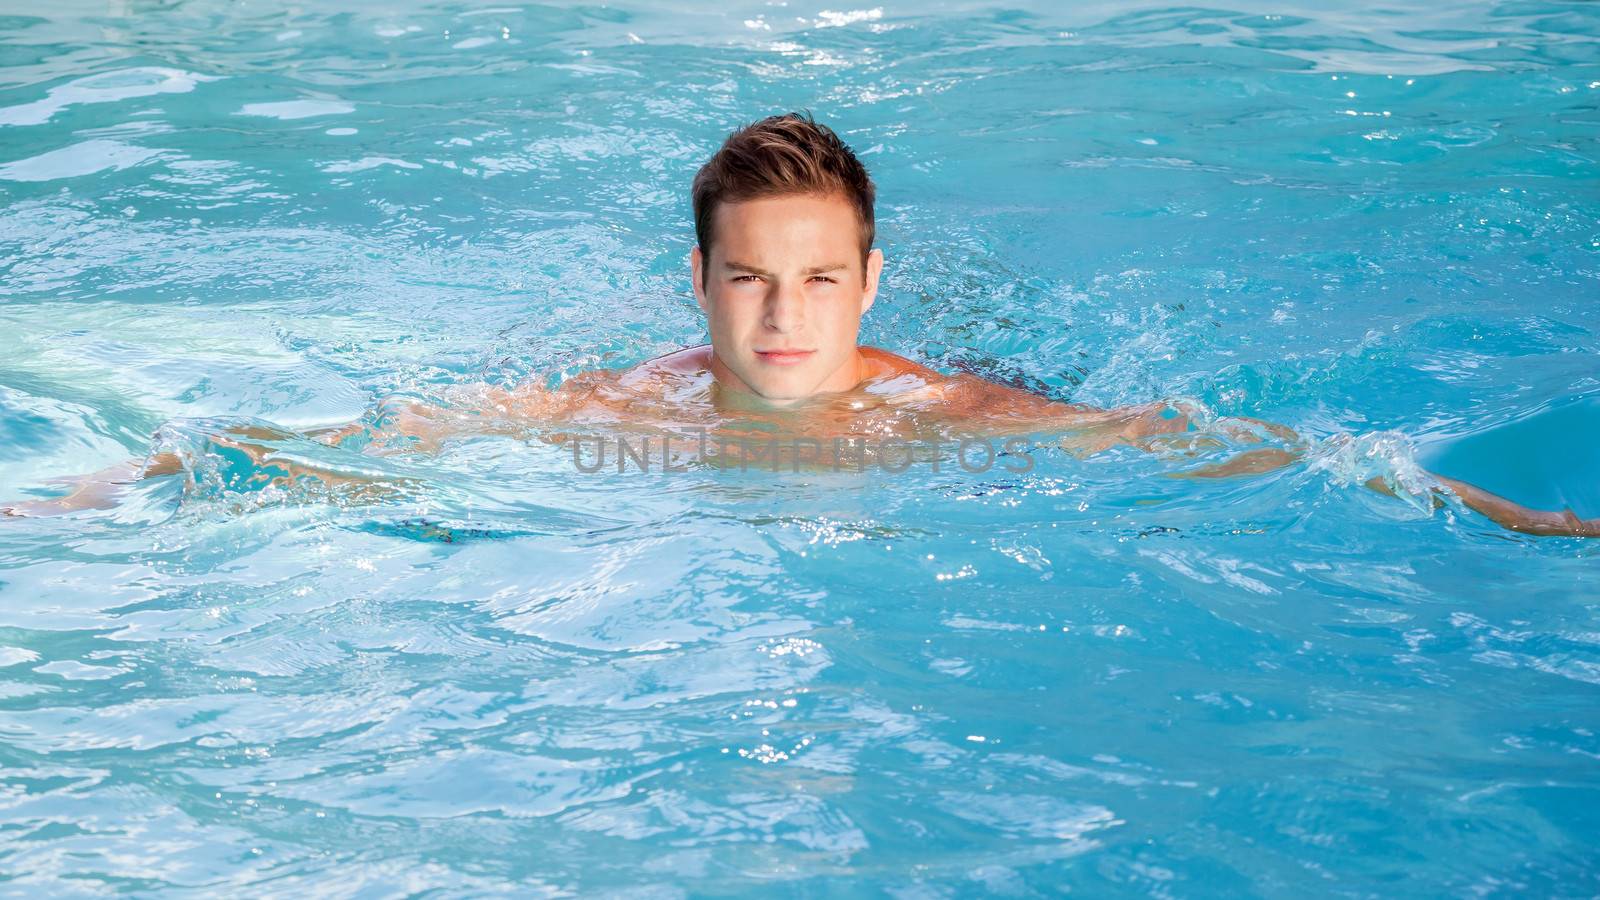 An image of a beautiful man swimming in the pool